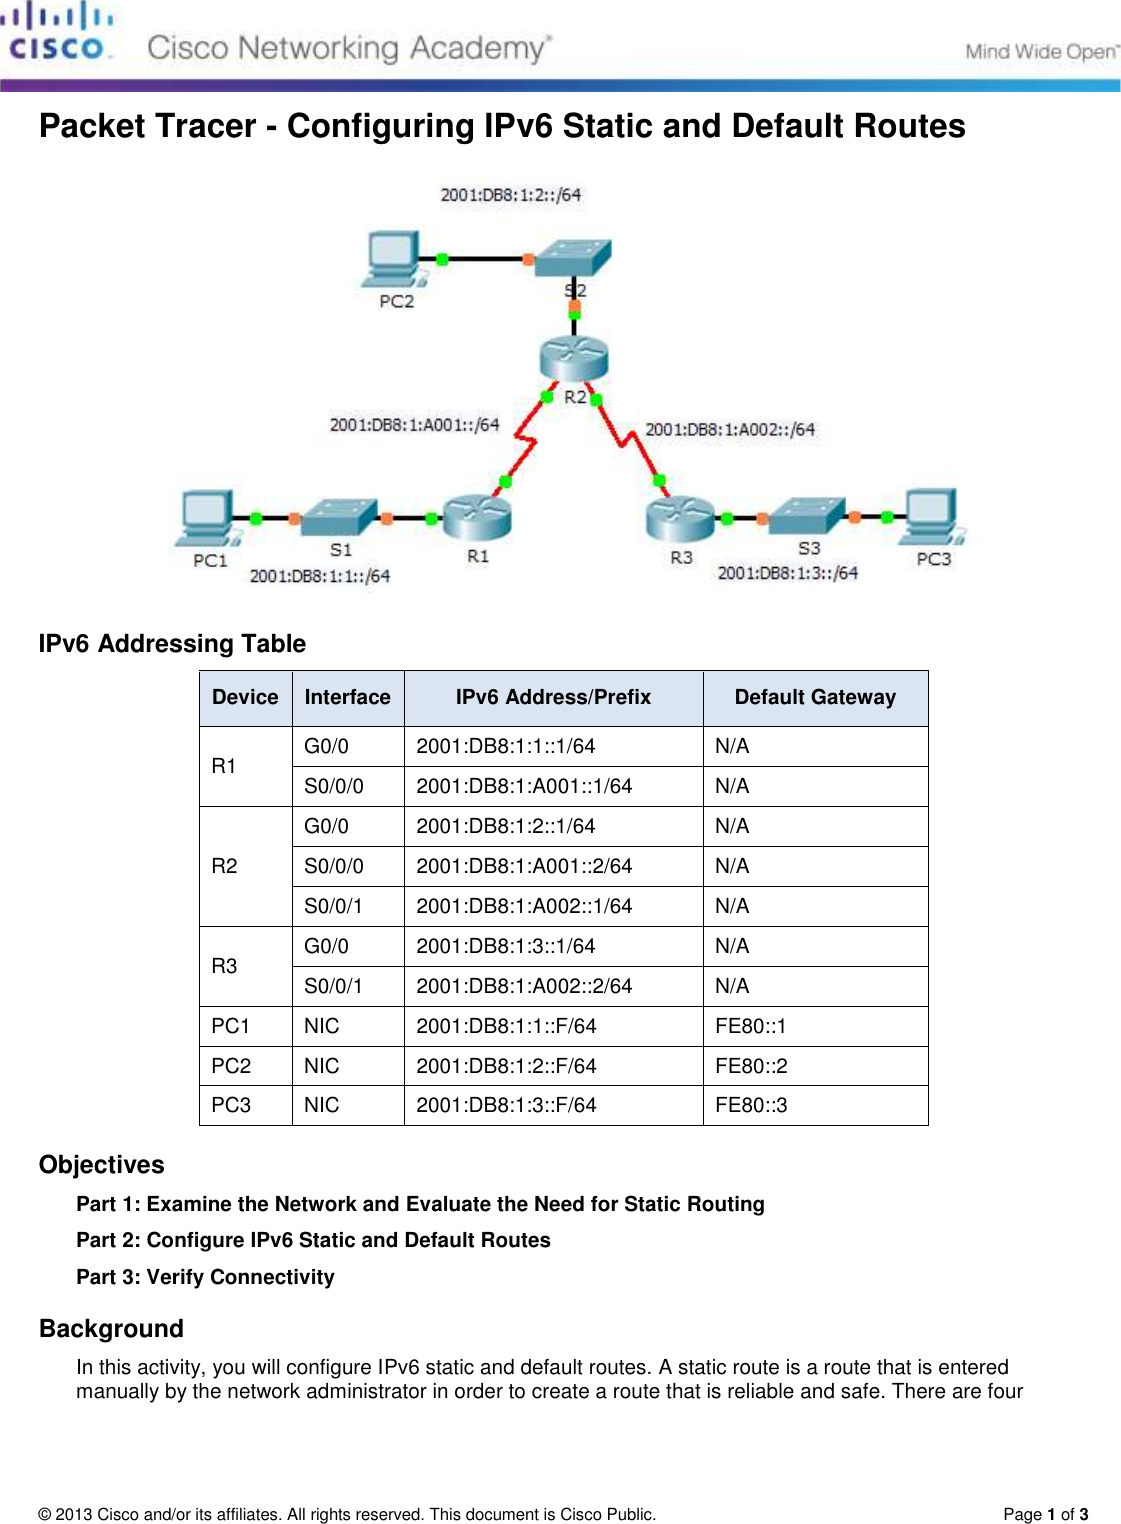 Page 1 of 3 - 2.2.4.4 Packet Tracer - Configuring IPv6 Static And Routes Instructions